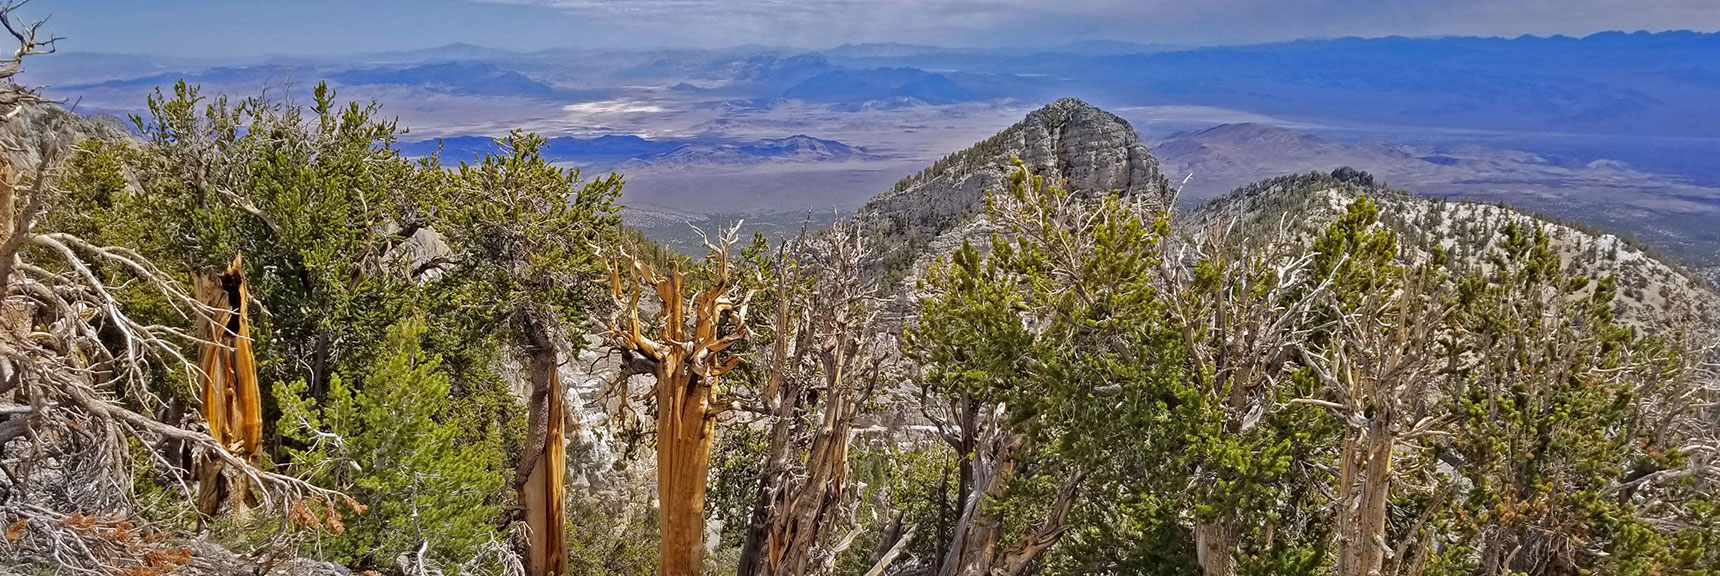 The Ridge and Saddle Between the Western Summit and The Sisters North. | The Sisters South | Lee Canyon | Mt Charleston Wilderness | Spring Mountains, Nevada